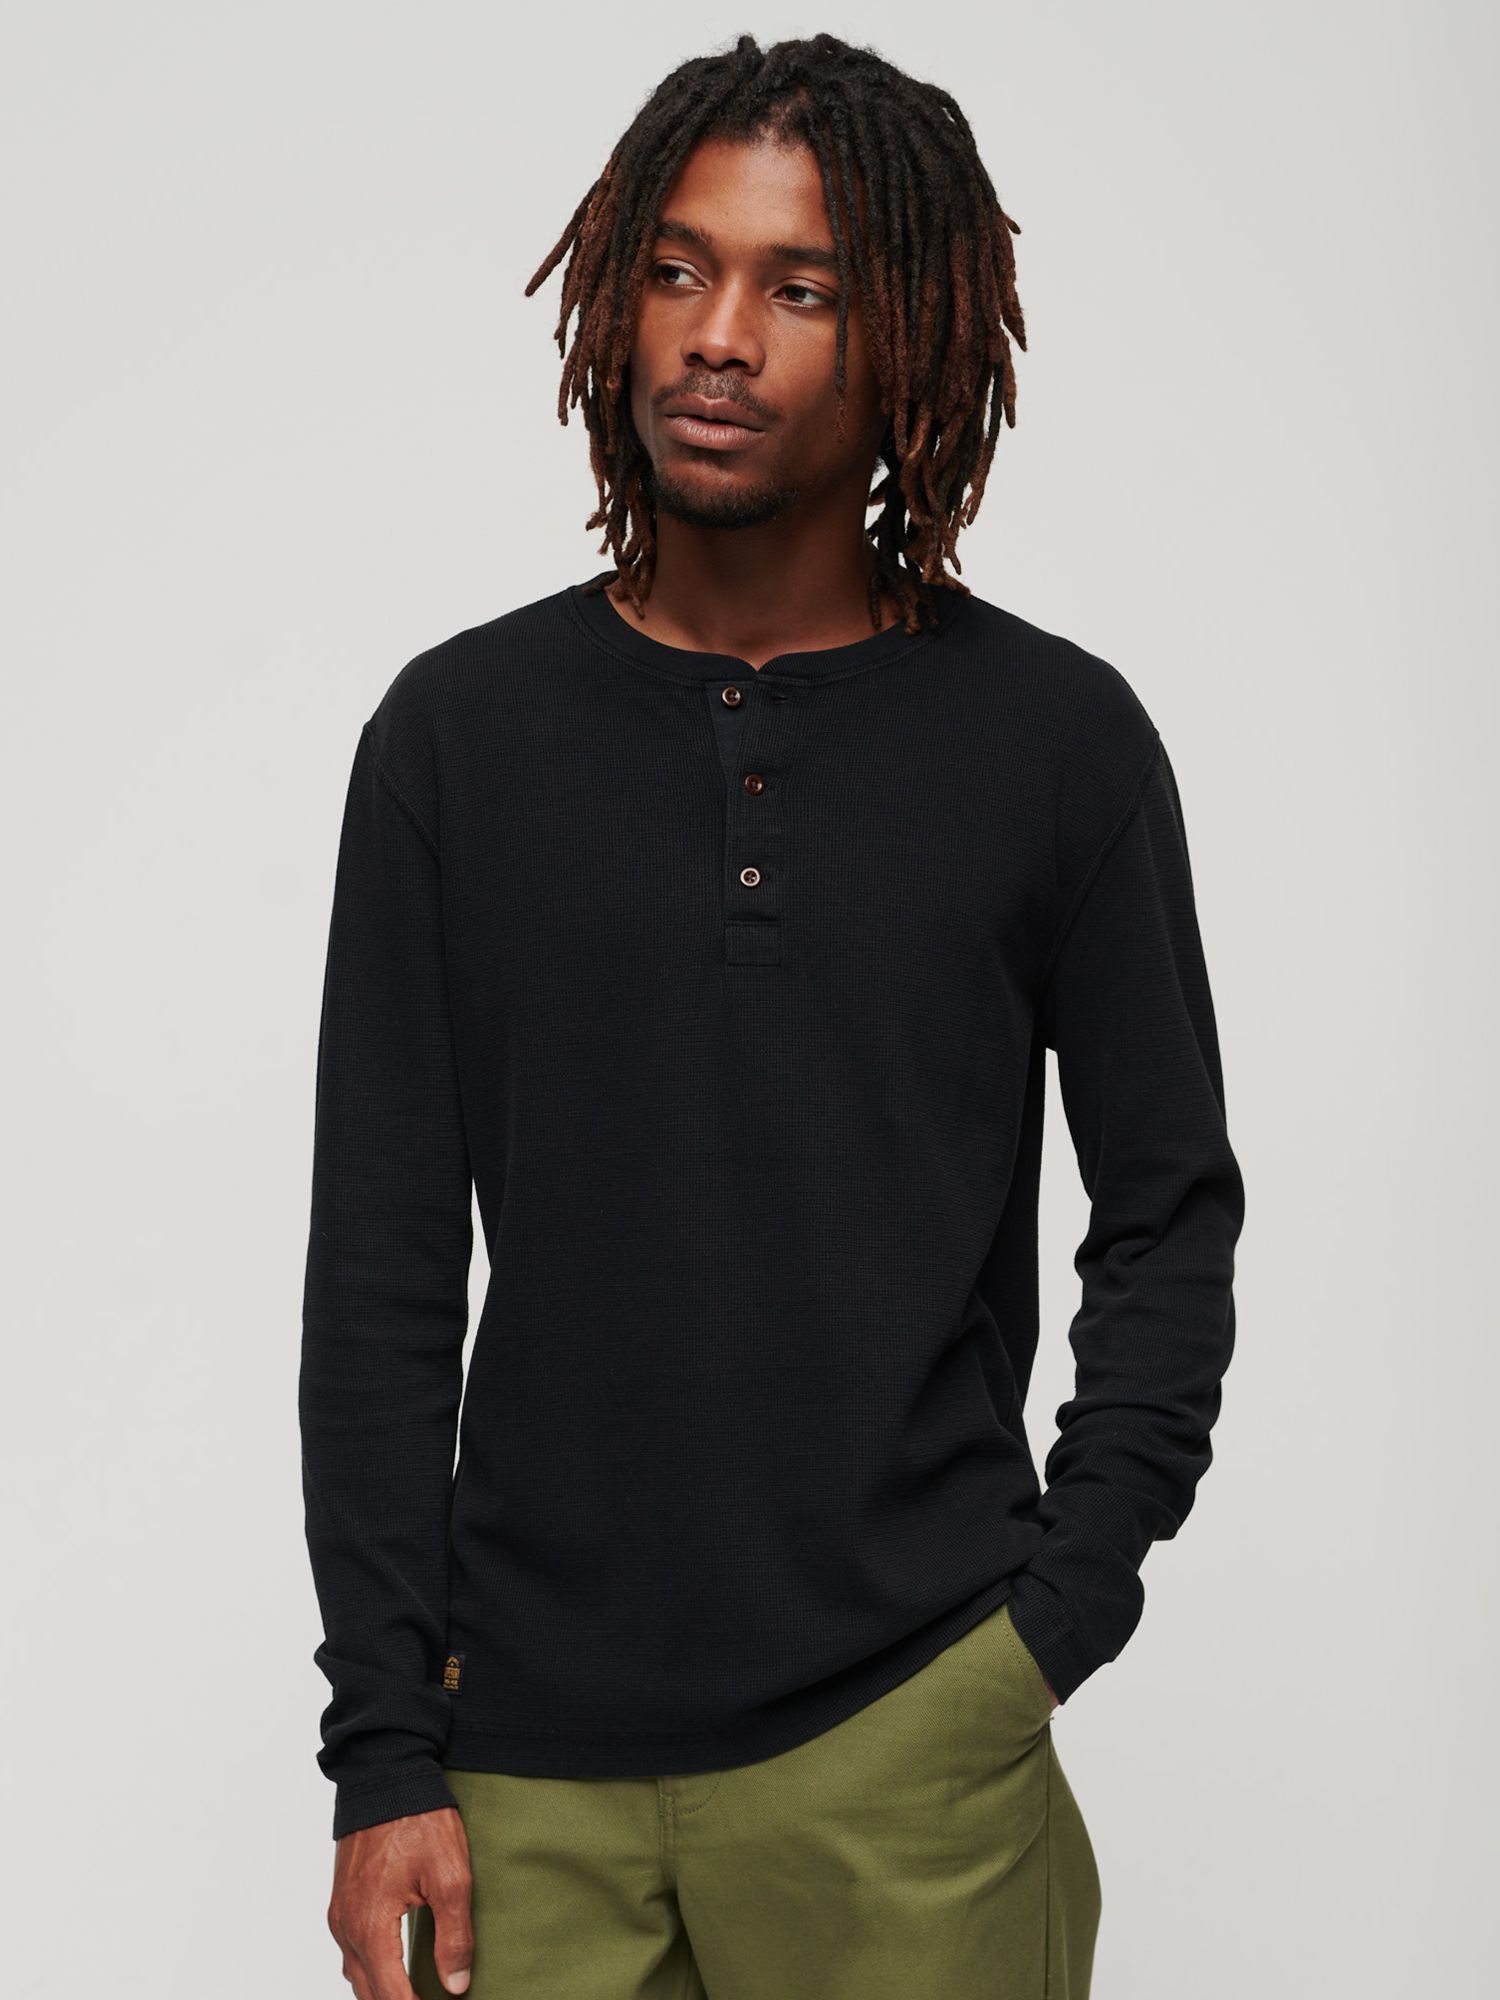 Superdry Organic Cotton Long Sleeve Waffle Henley Top, Black at